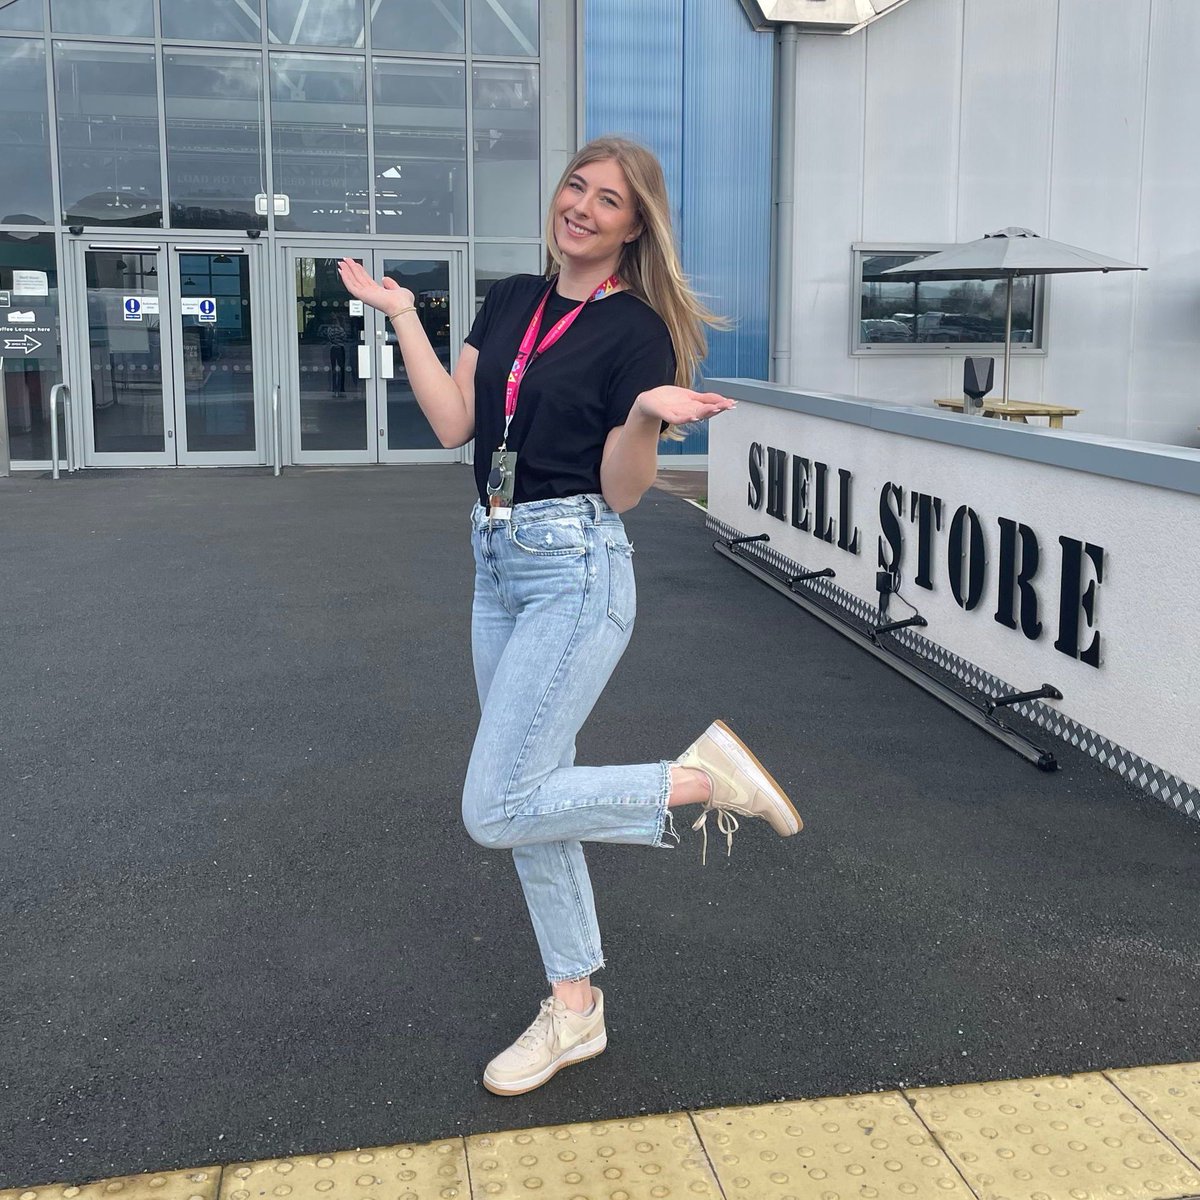 We are so excited to welcome Dani to the Shell Store team as our new Hub Manager! She has some great ideas and we can’t wait to see what she brings to the space. Make sure to stop by reception and say hi when you get the chance👋